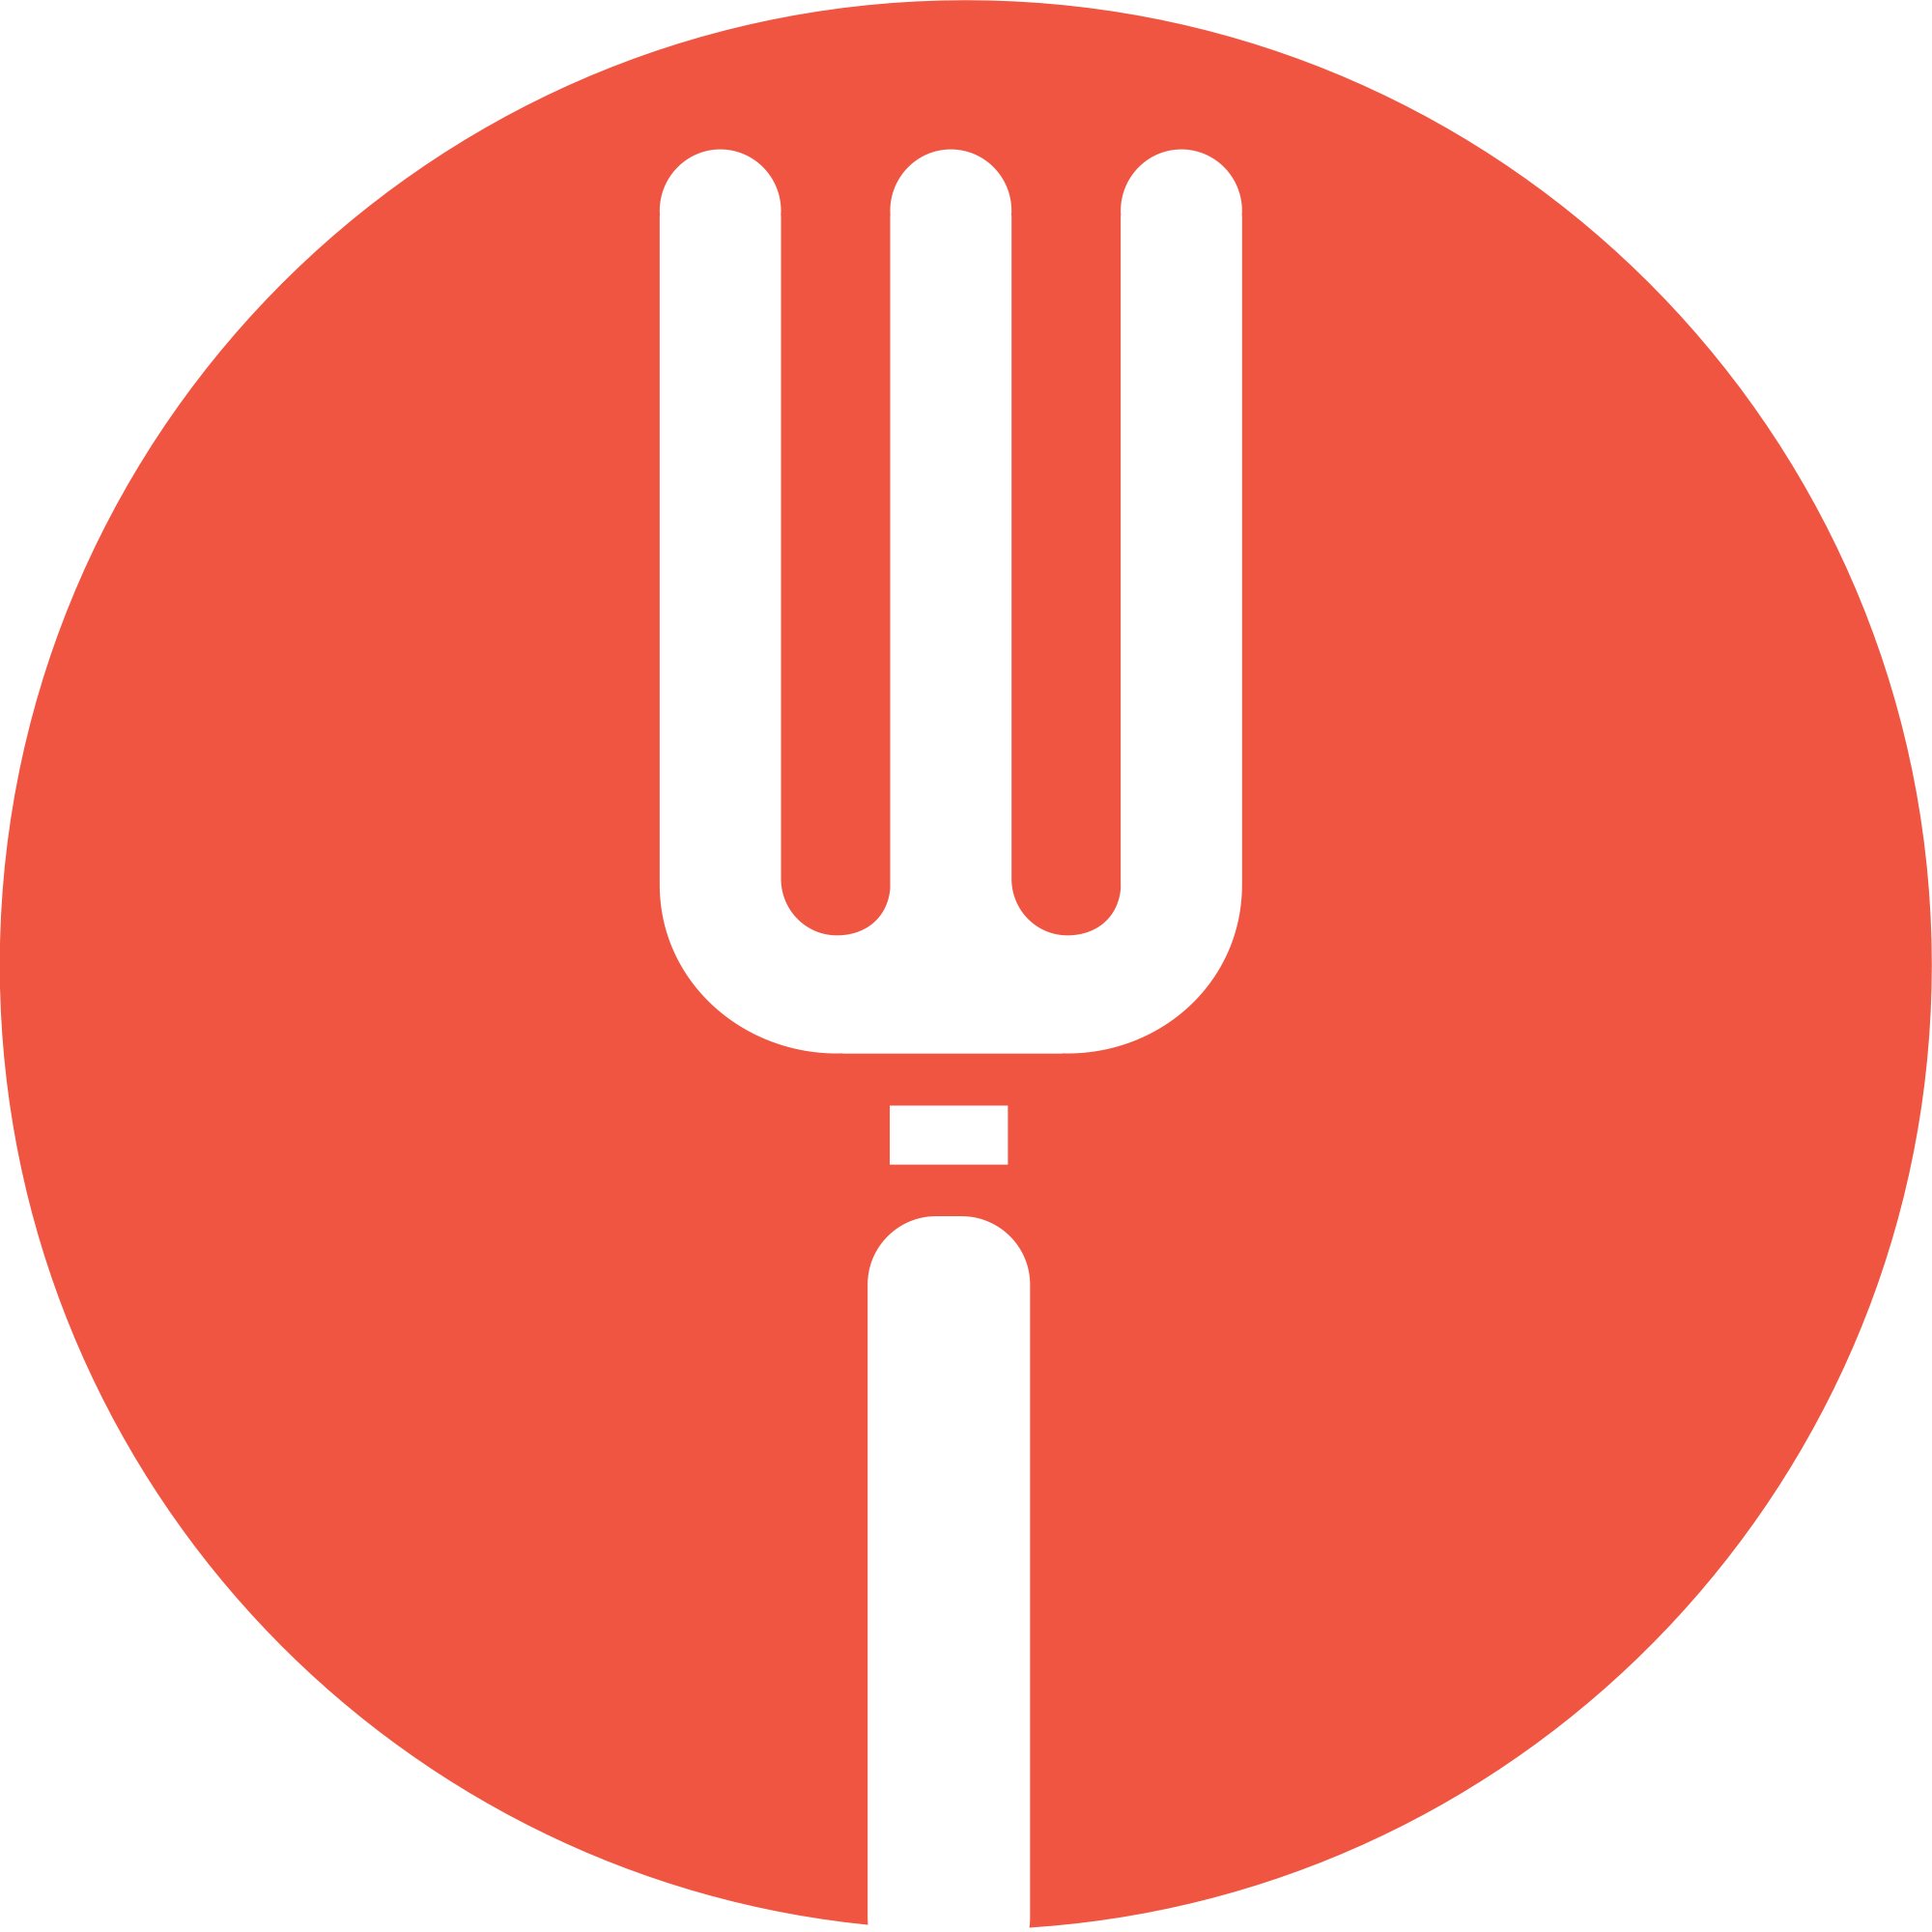 Join the WacoFork Club for great deals at local restaurants. https://t.co/JrWLG7YQ0Y